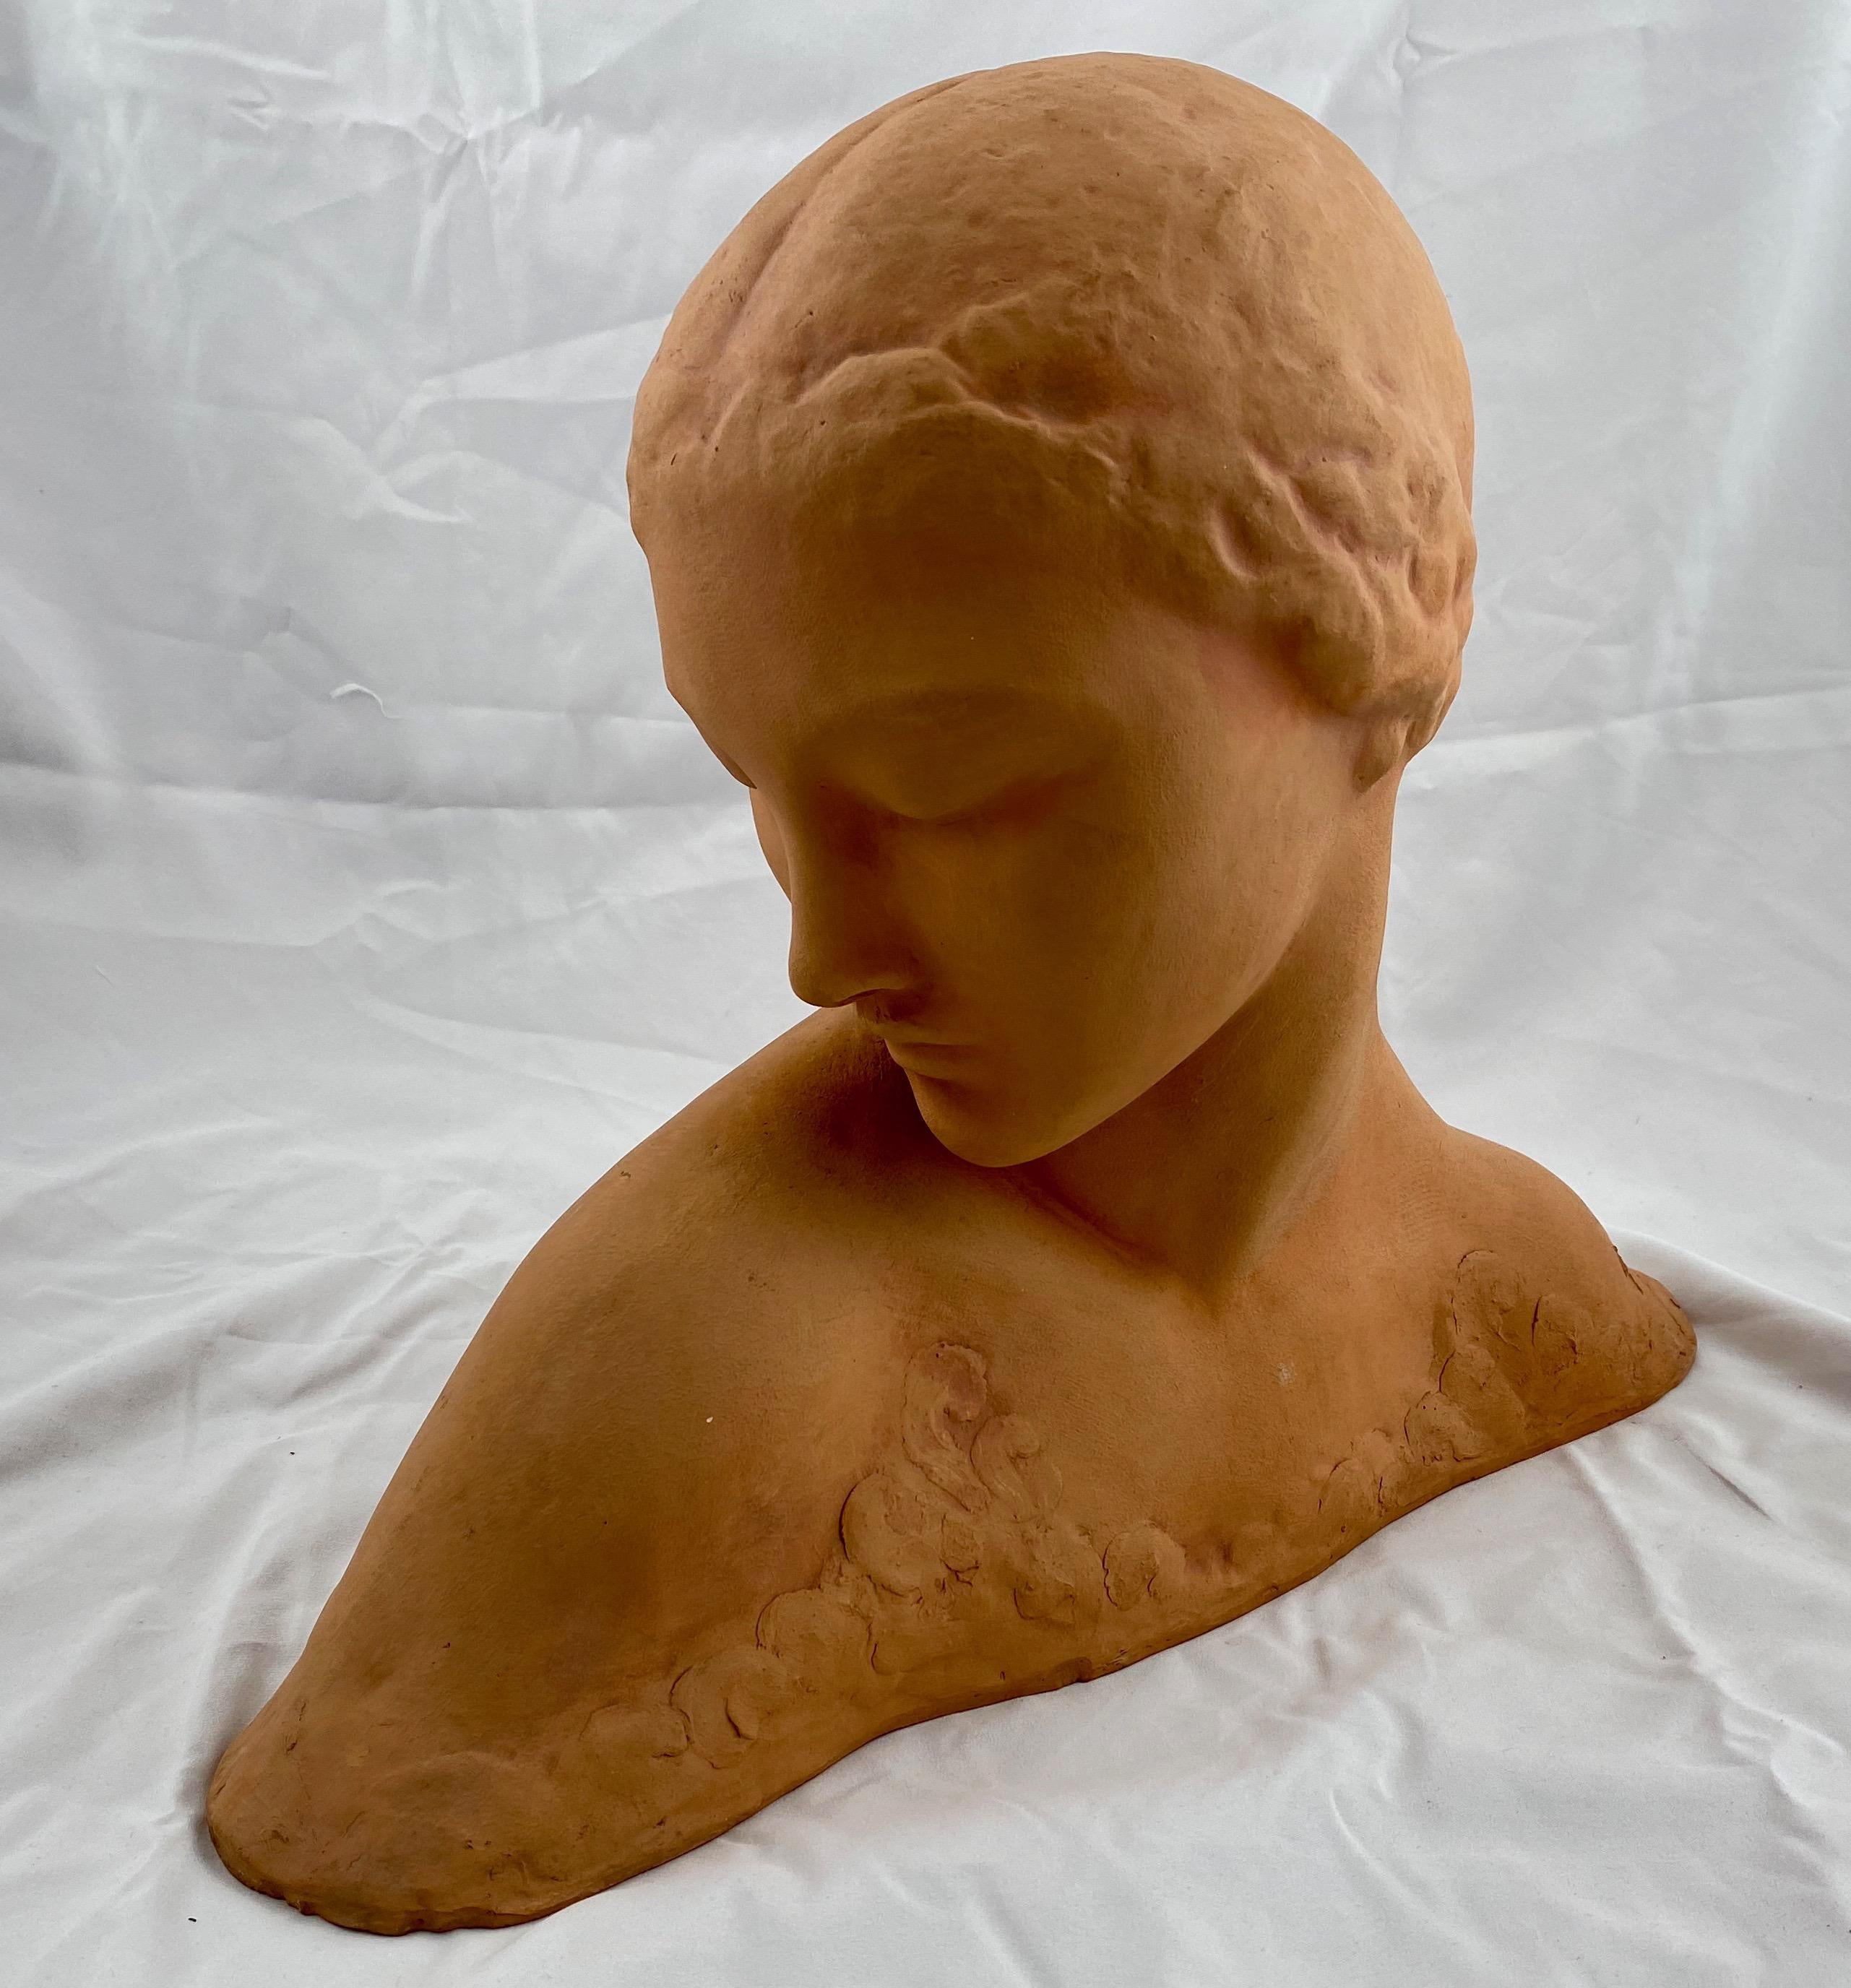 A really beautiful bust signed Gennarelli and dated 1941. Made of terracotta. A Gennarelli was born in Naples and produced various works over his career. He exhibited at the Paris salon from 1913 until his death.